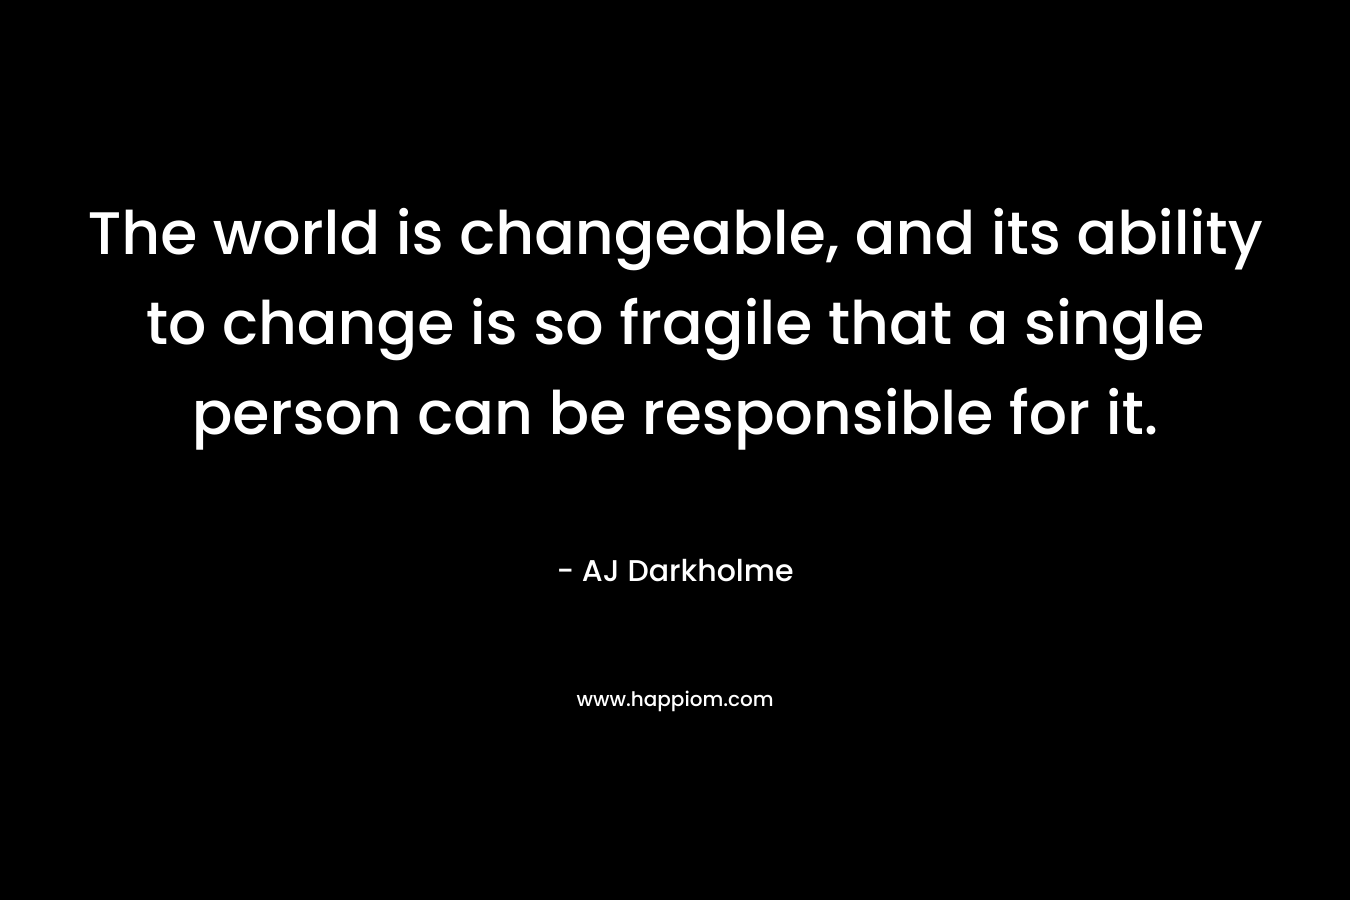 The world is changeable, and its ability to change is so fragile that a single person can be responsible for it.